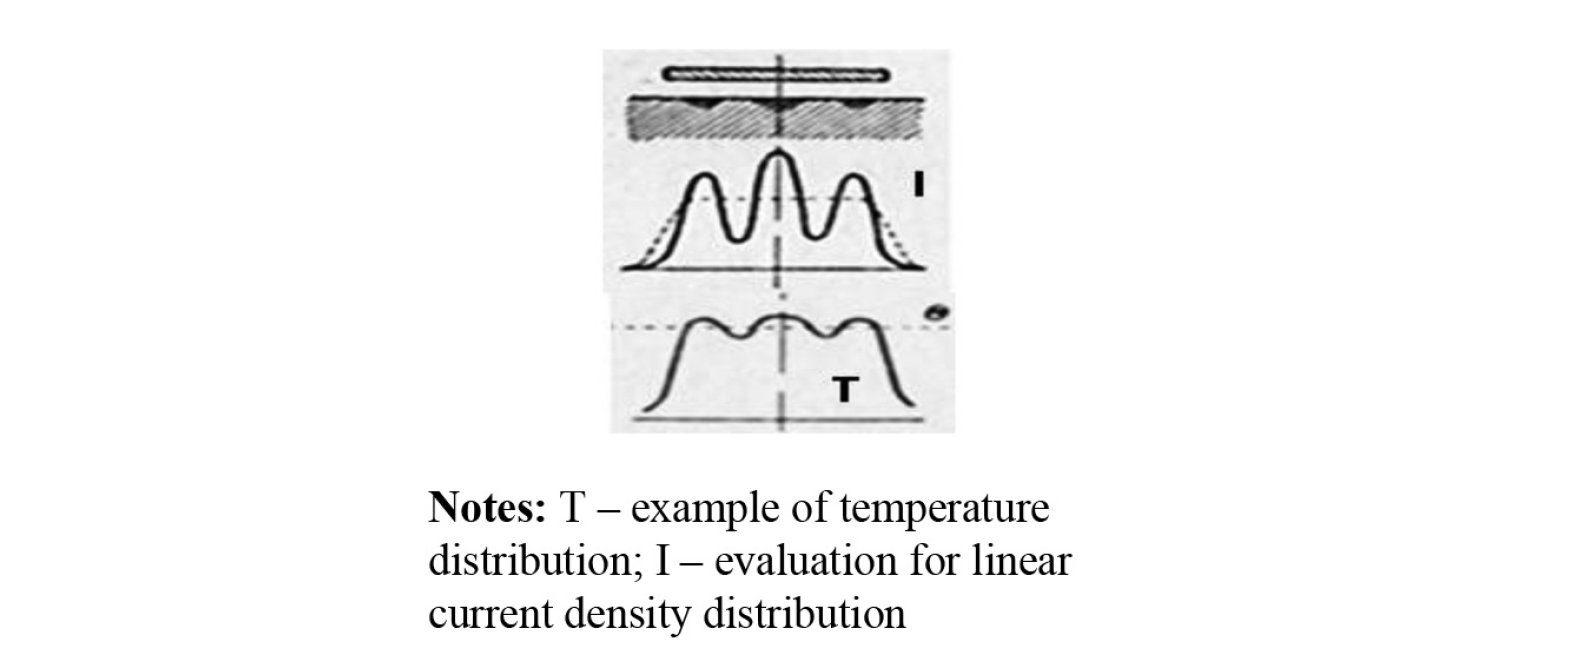 Fluxtrol - HES 2016 Striation Effect in Induction Heating: Myths and Reality - Figure 2